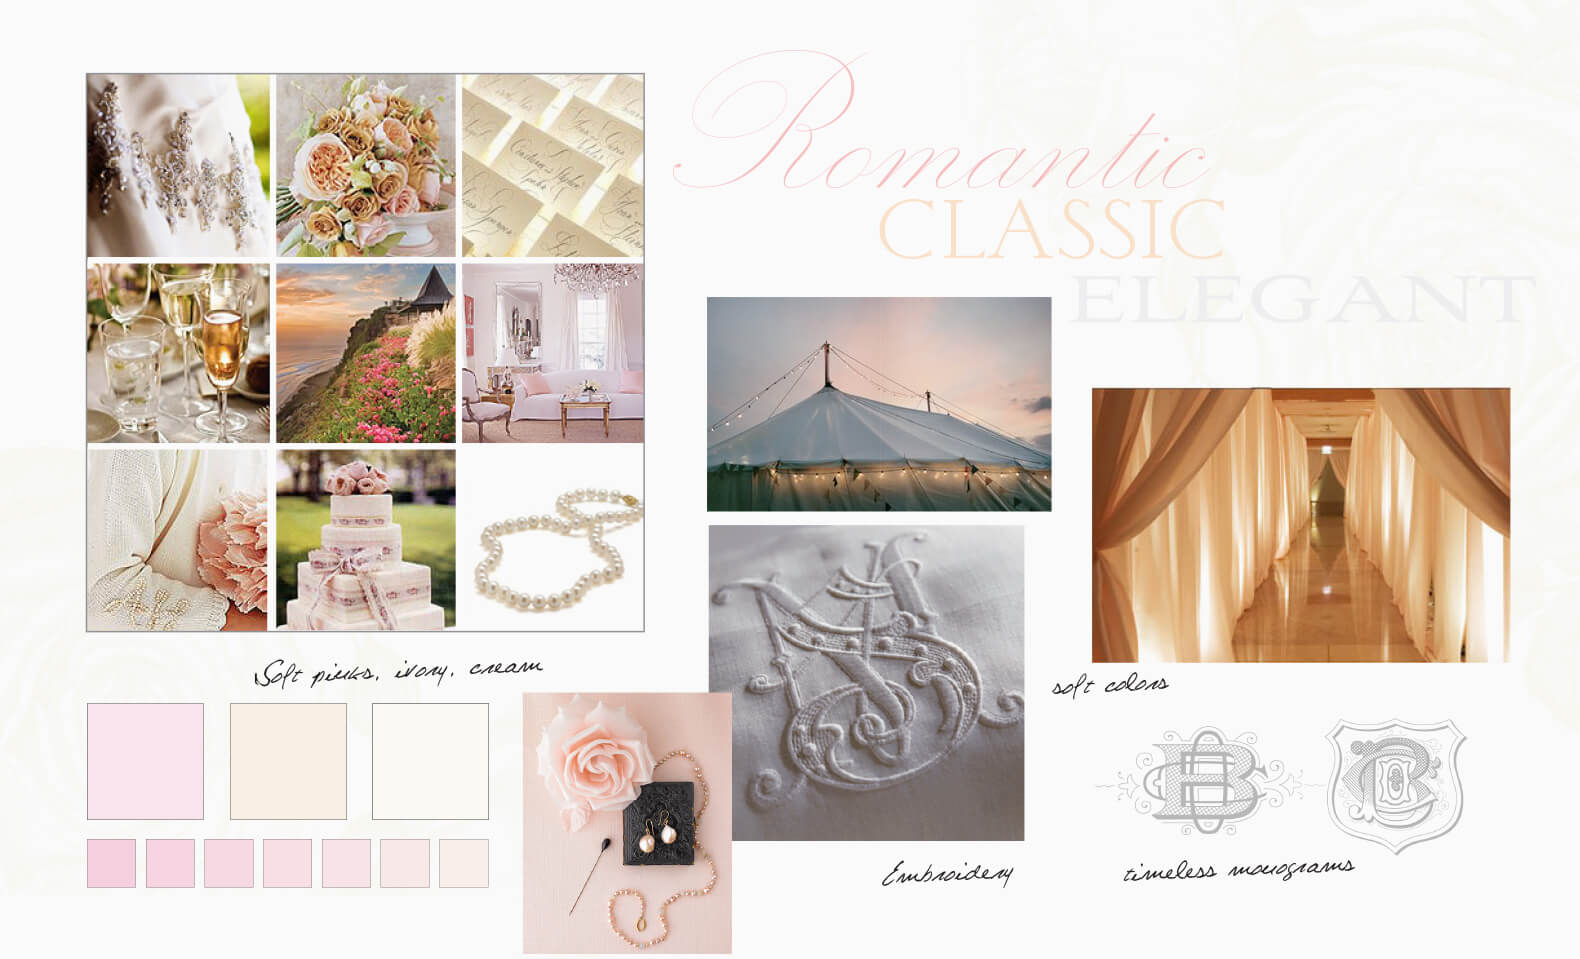 Classic, timeless and elegant inspiration